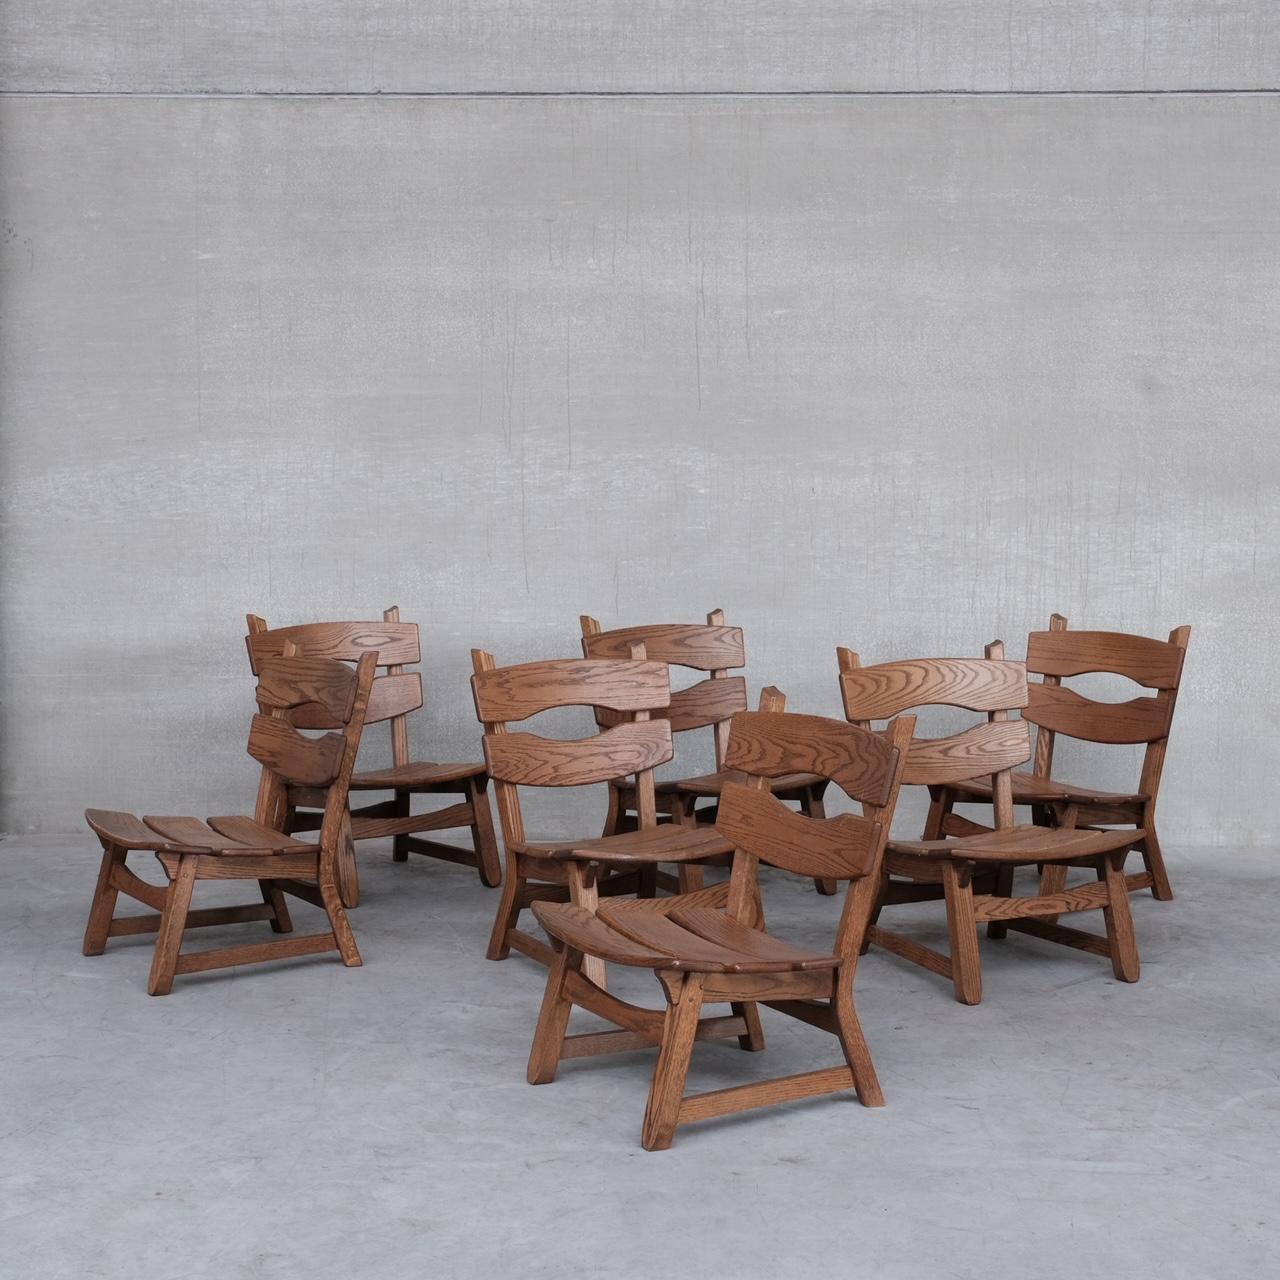 Brutalist Mid-Century Low Wooden Lounge Chairs '7' For Sale 11